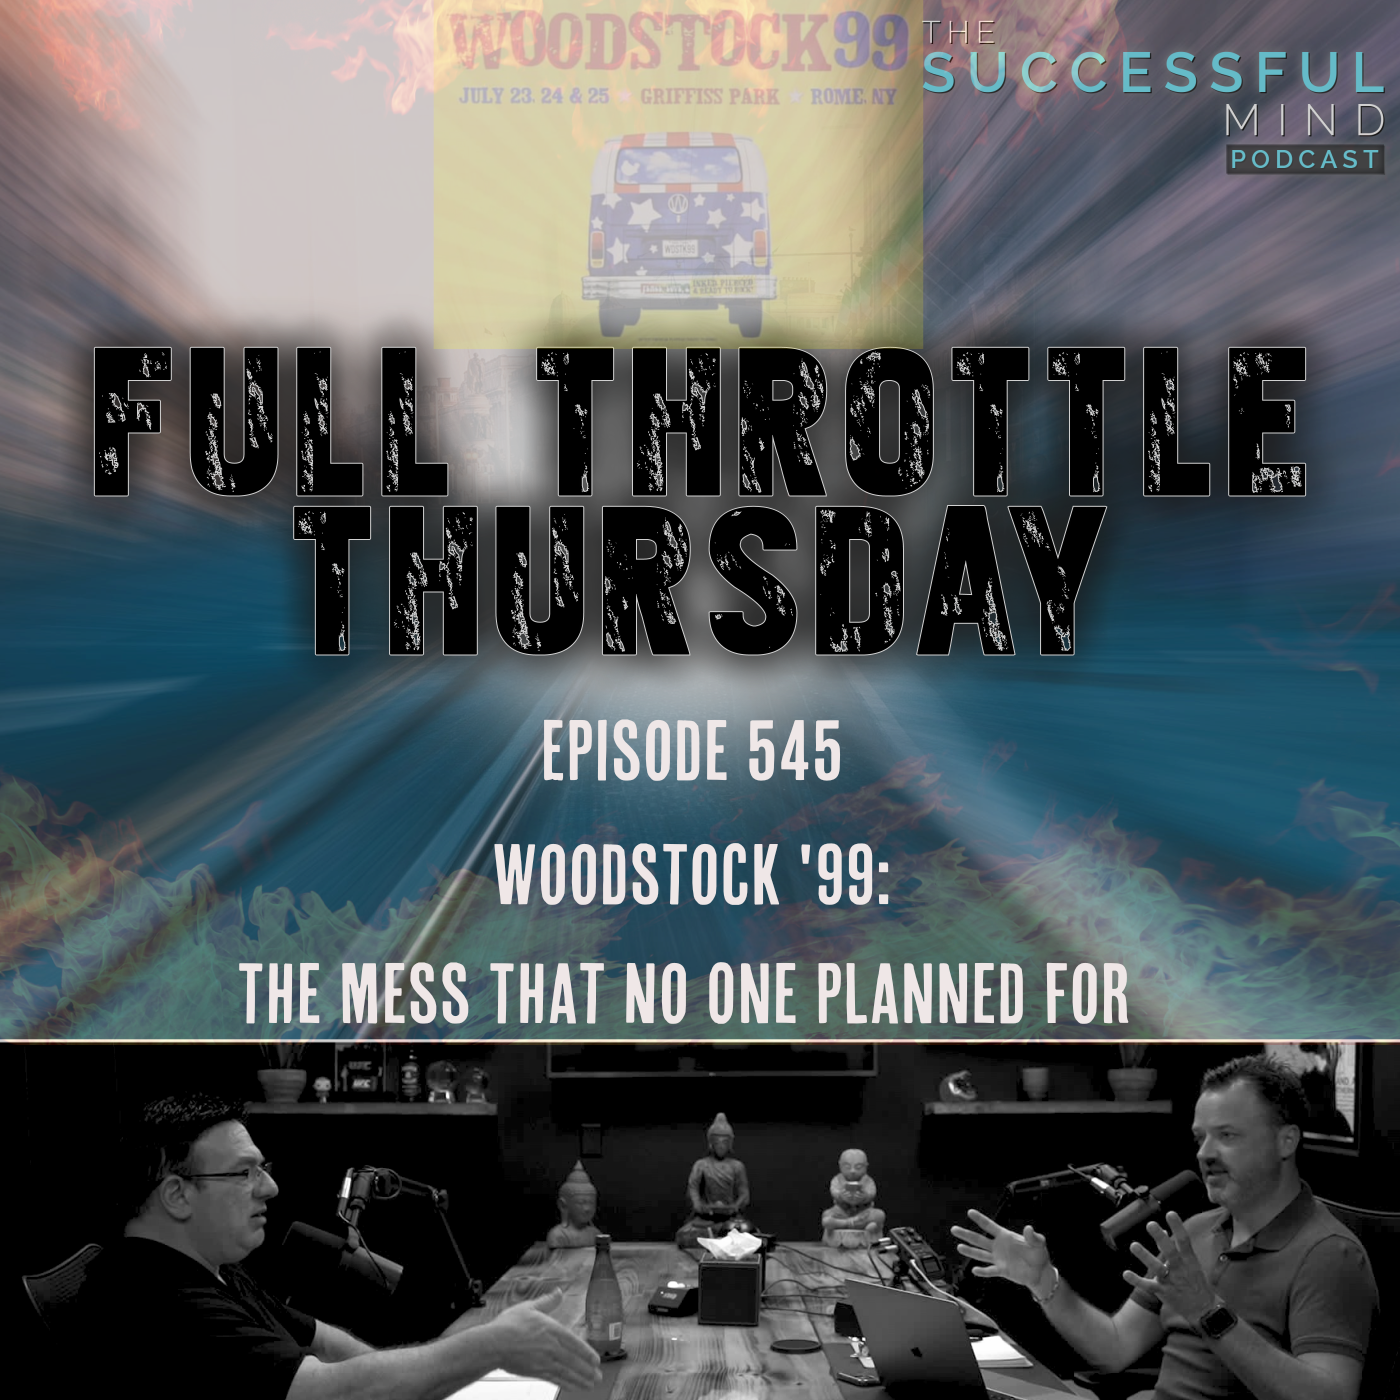 The Successful Mind Podcast – Episode 545 – Full Throttle Thursday – Woodstock 99: The Mess That No One Planned For